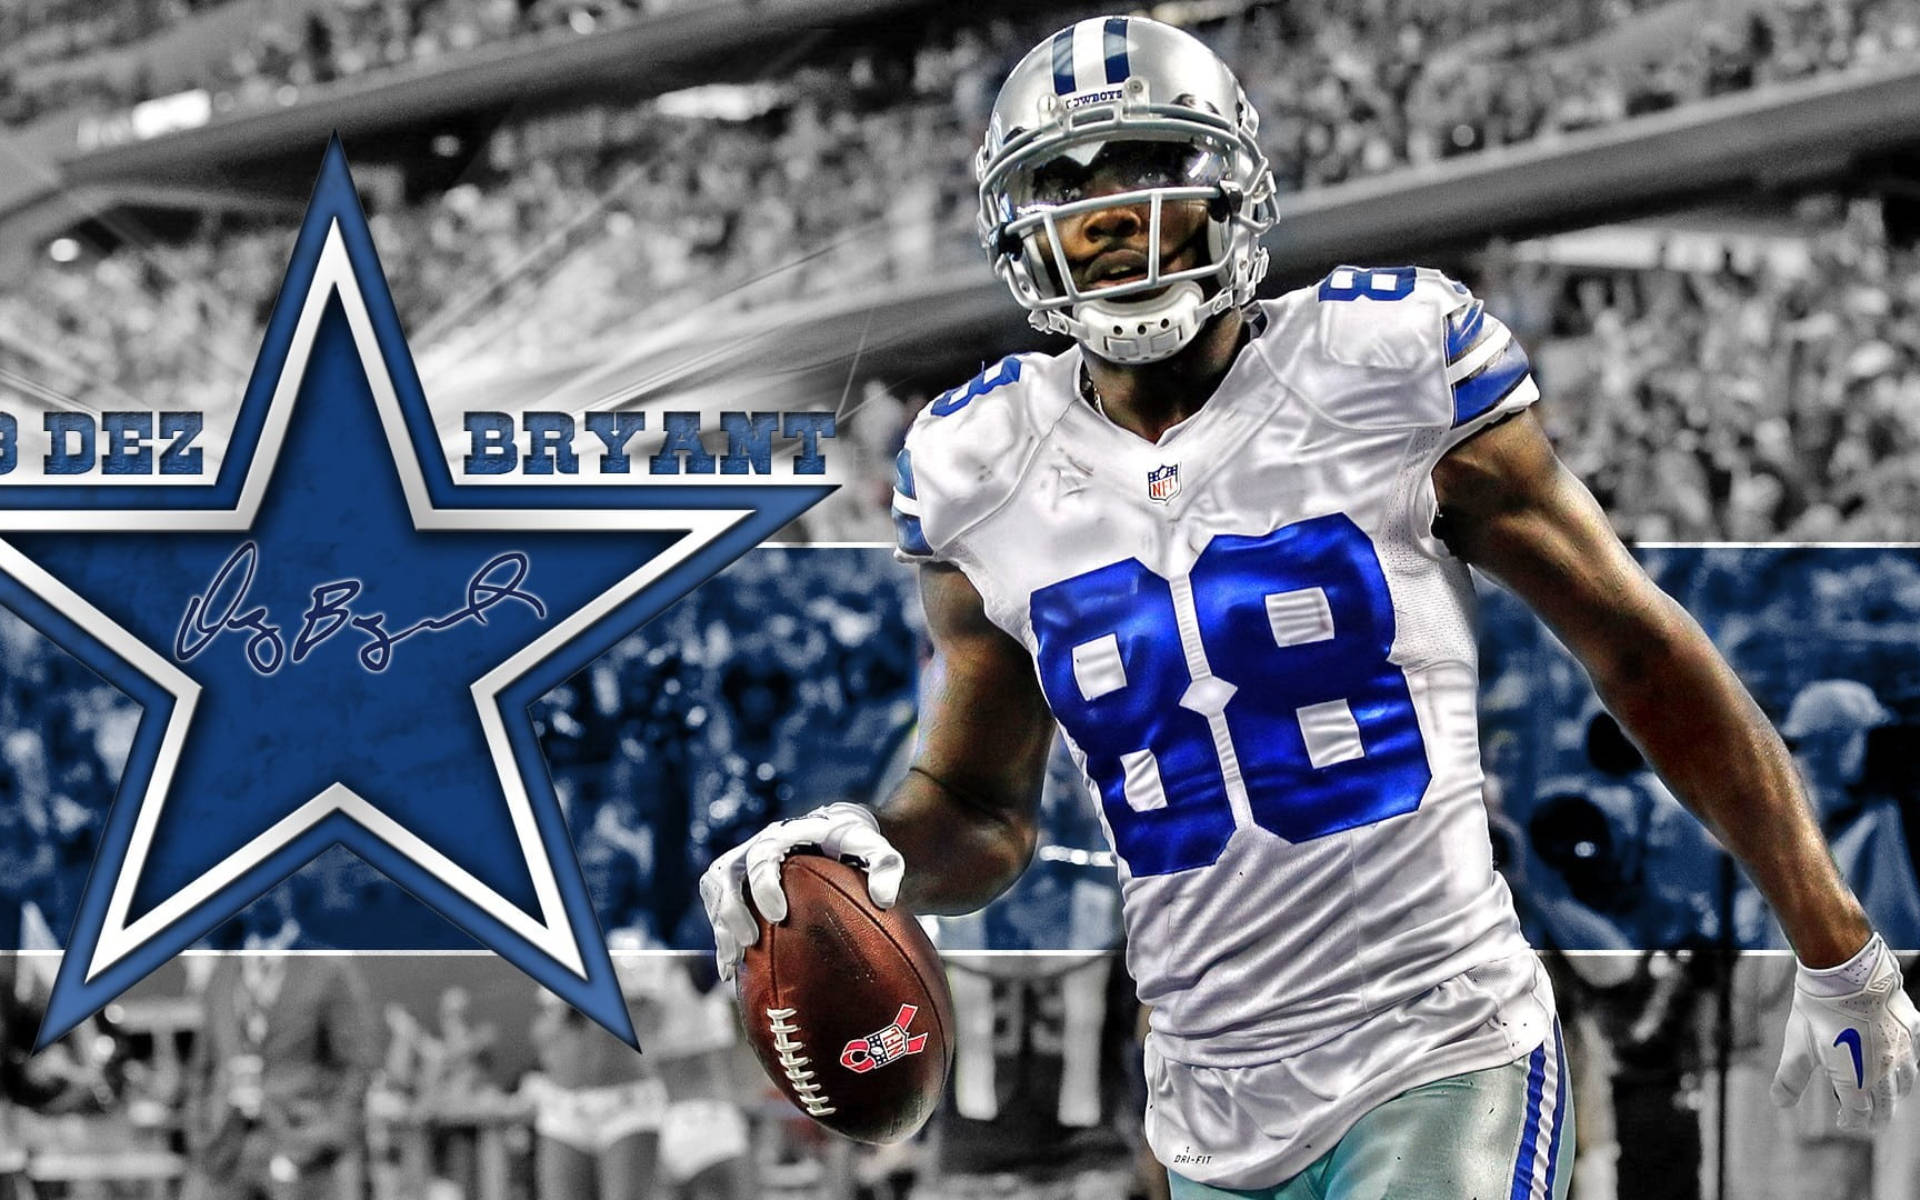 Dez Bryant From The Awesome Dallas Cowboys Wallpaper